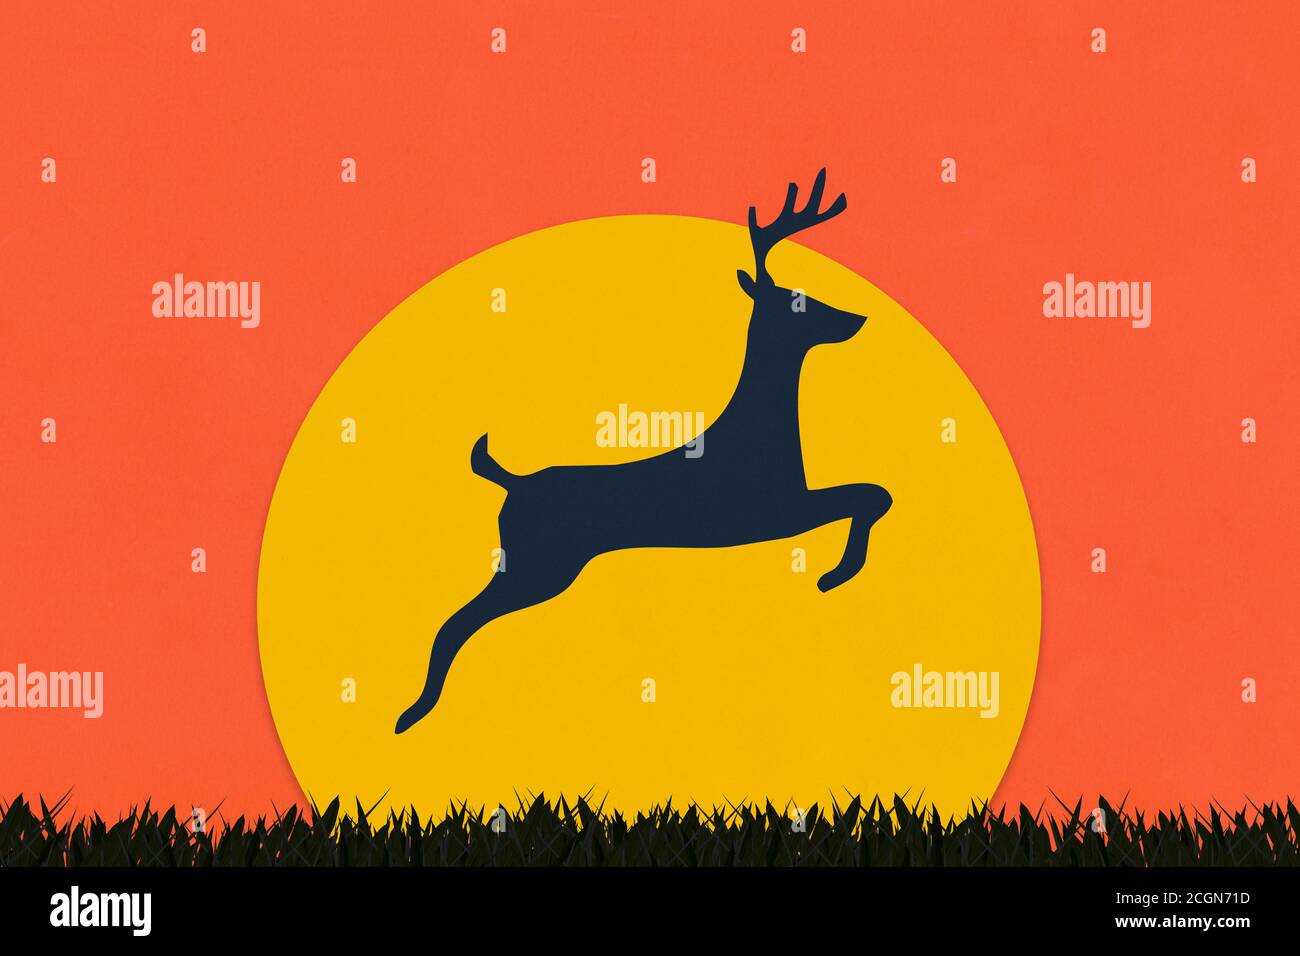 Deer made of art paper in silhouette style, Paper art of safari sunset. Stock Photo